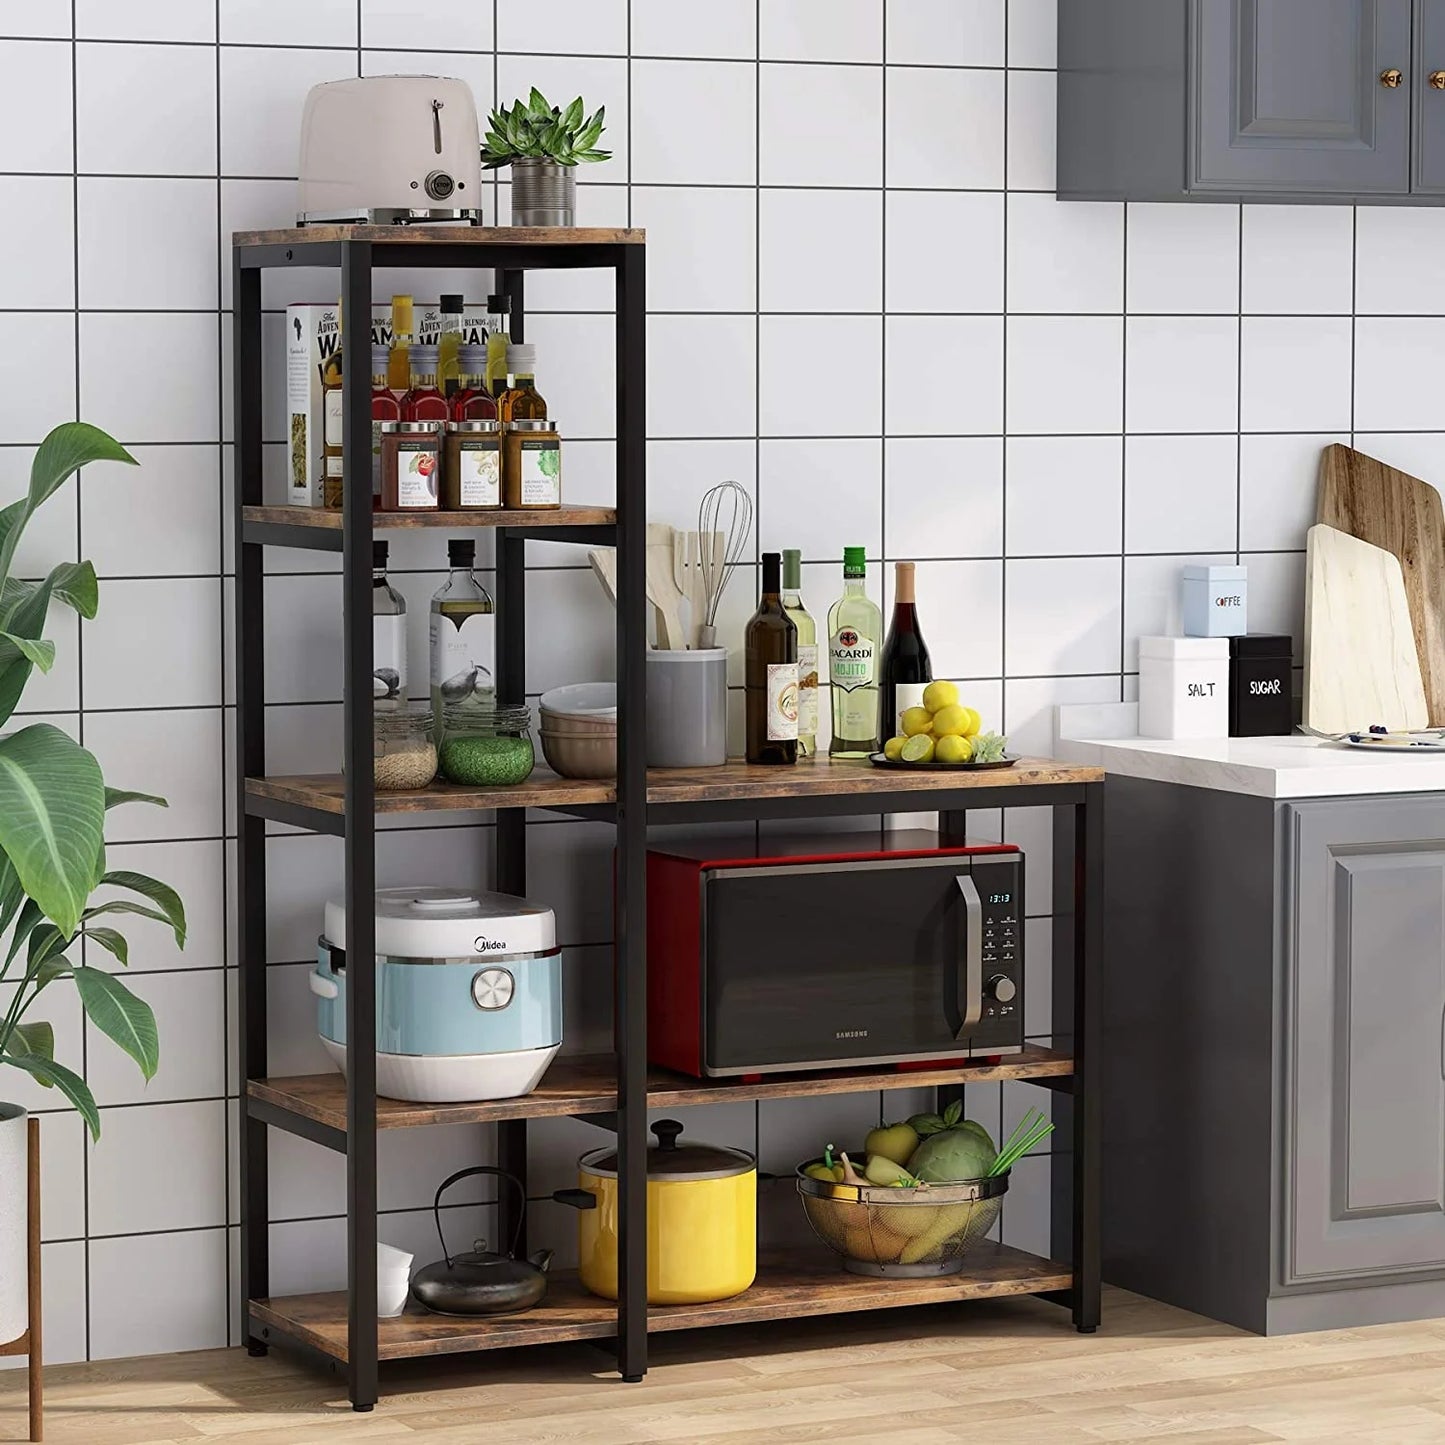 Tribesigns Kitchen Baker's Rack, 5-Tier Microwave Oven Stand Shelf